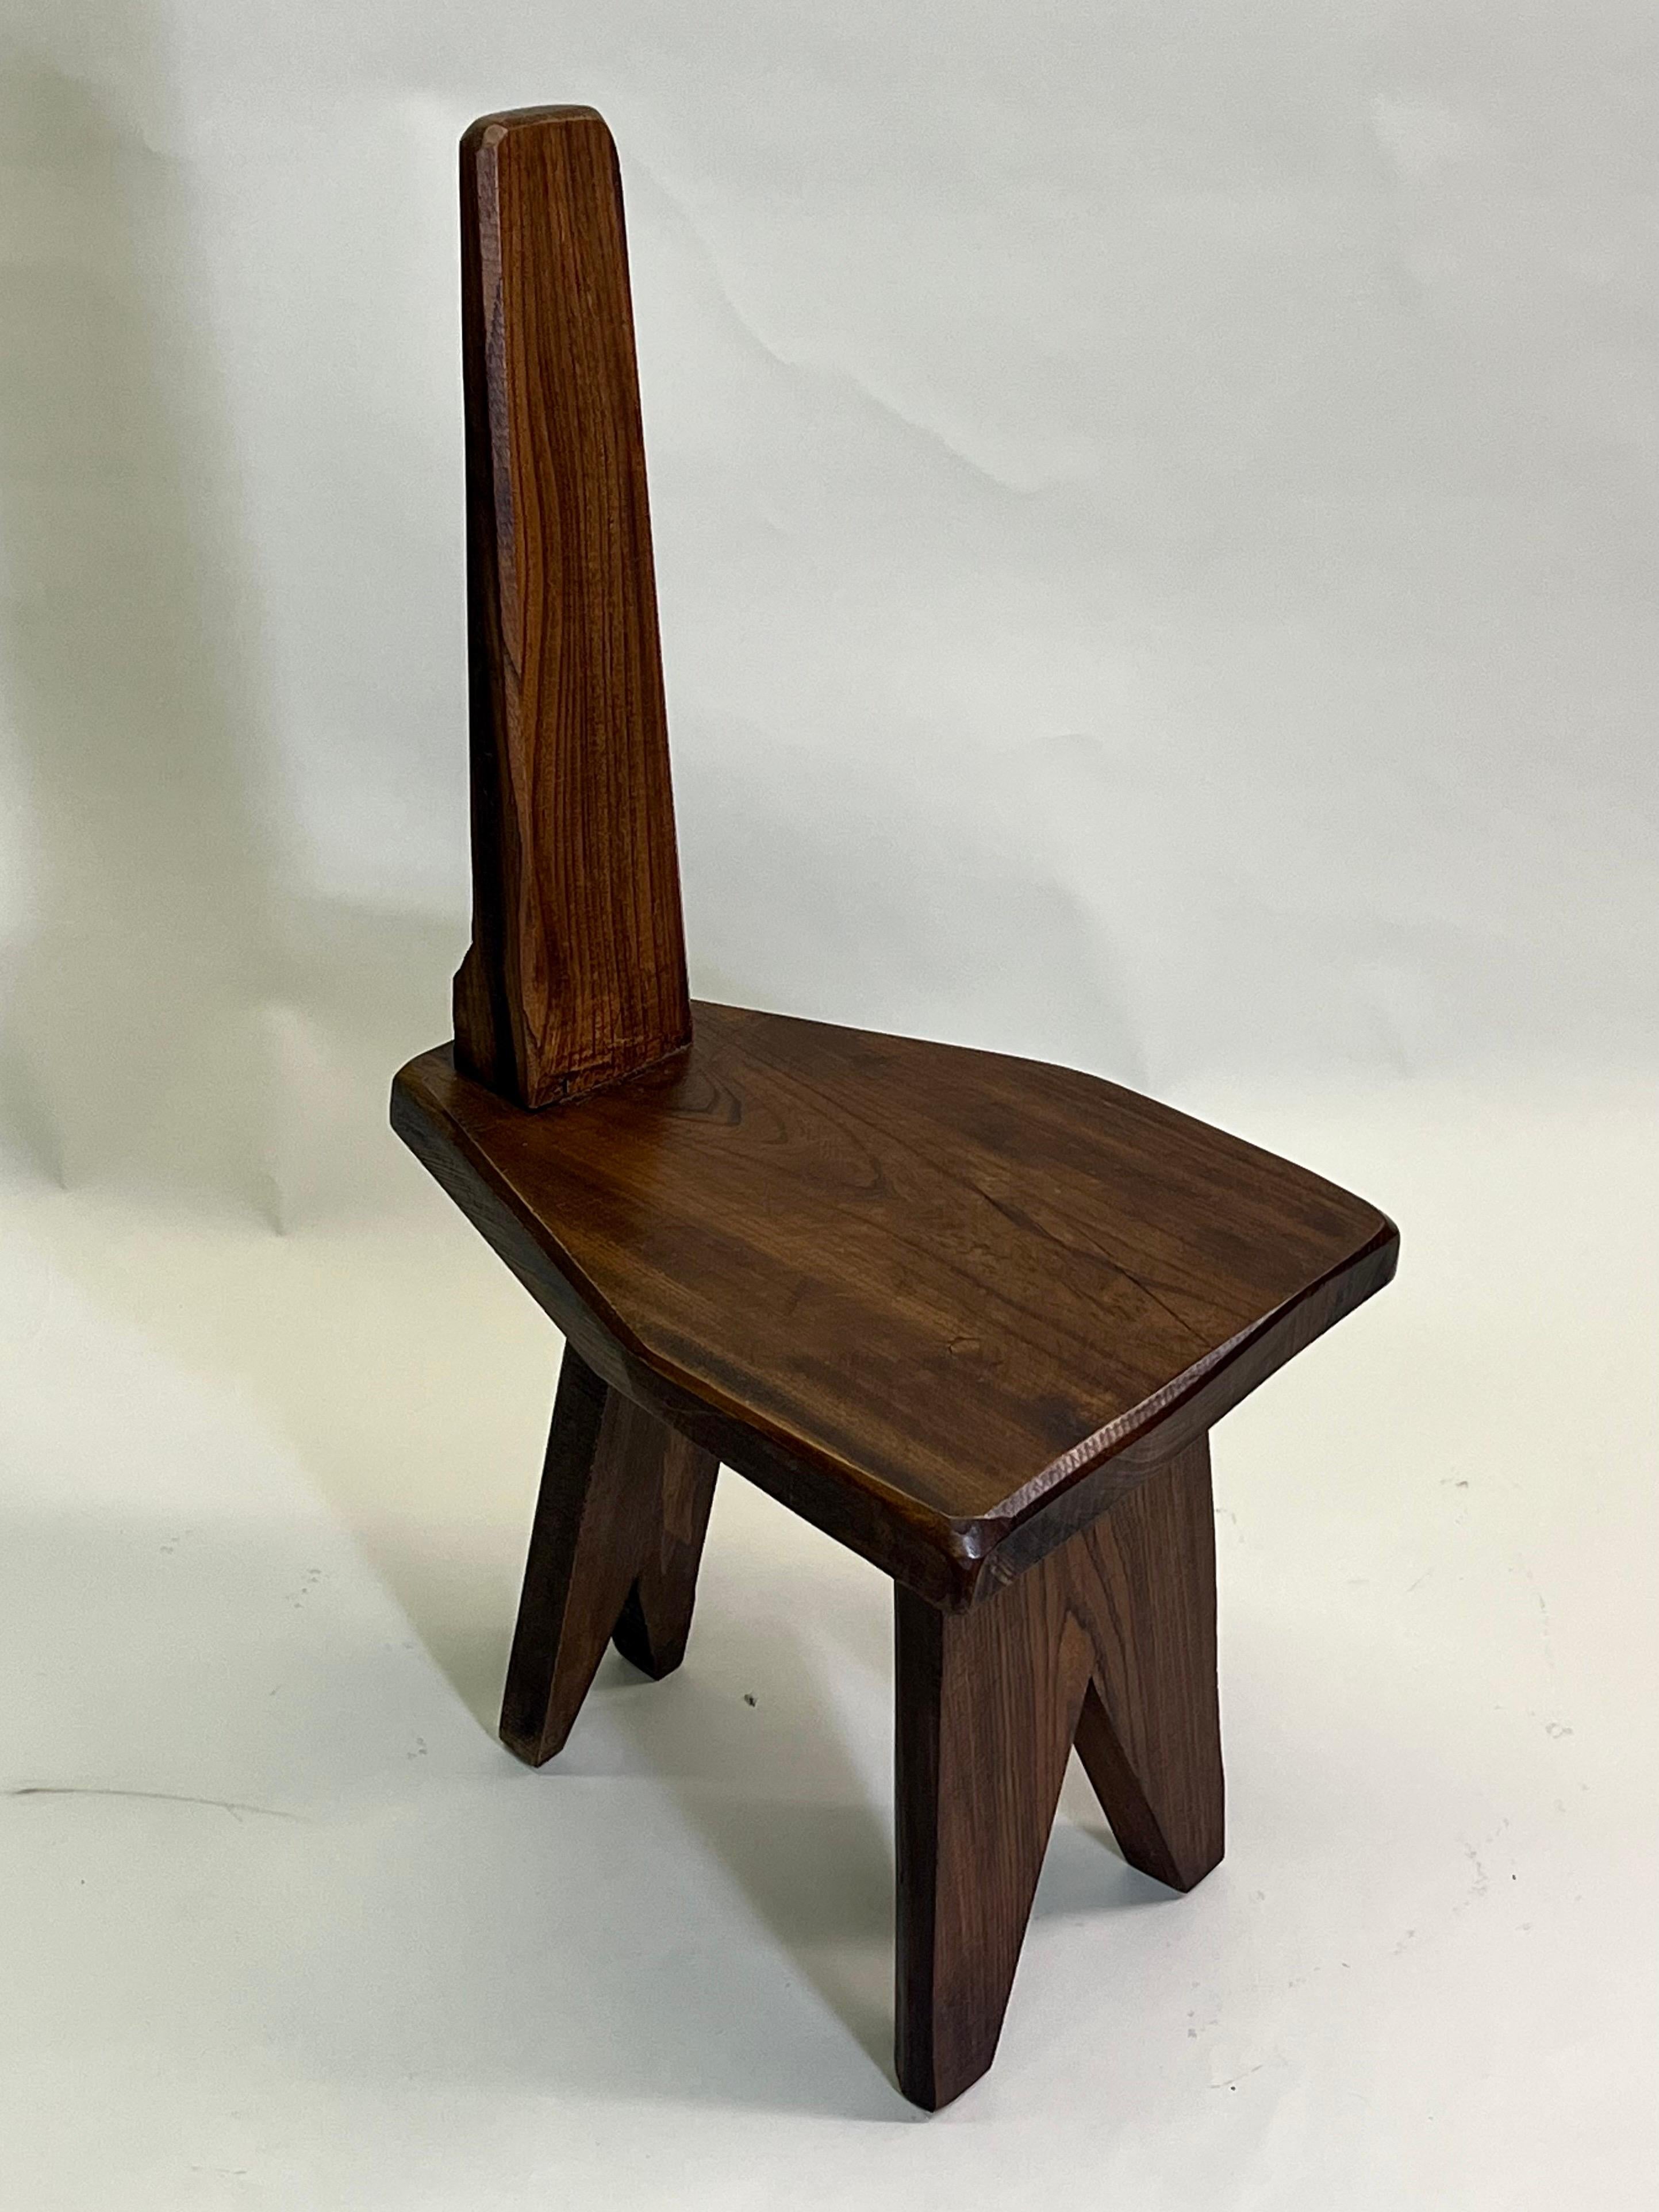 Hardwood Rare Pair of French Mid-Century Modern Craftsman Wood Chairs, Pierre Jeanneret For Sale